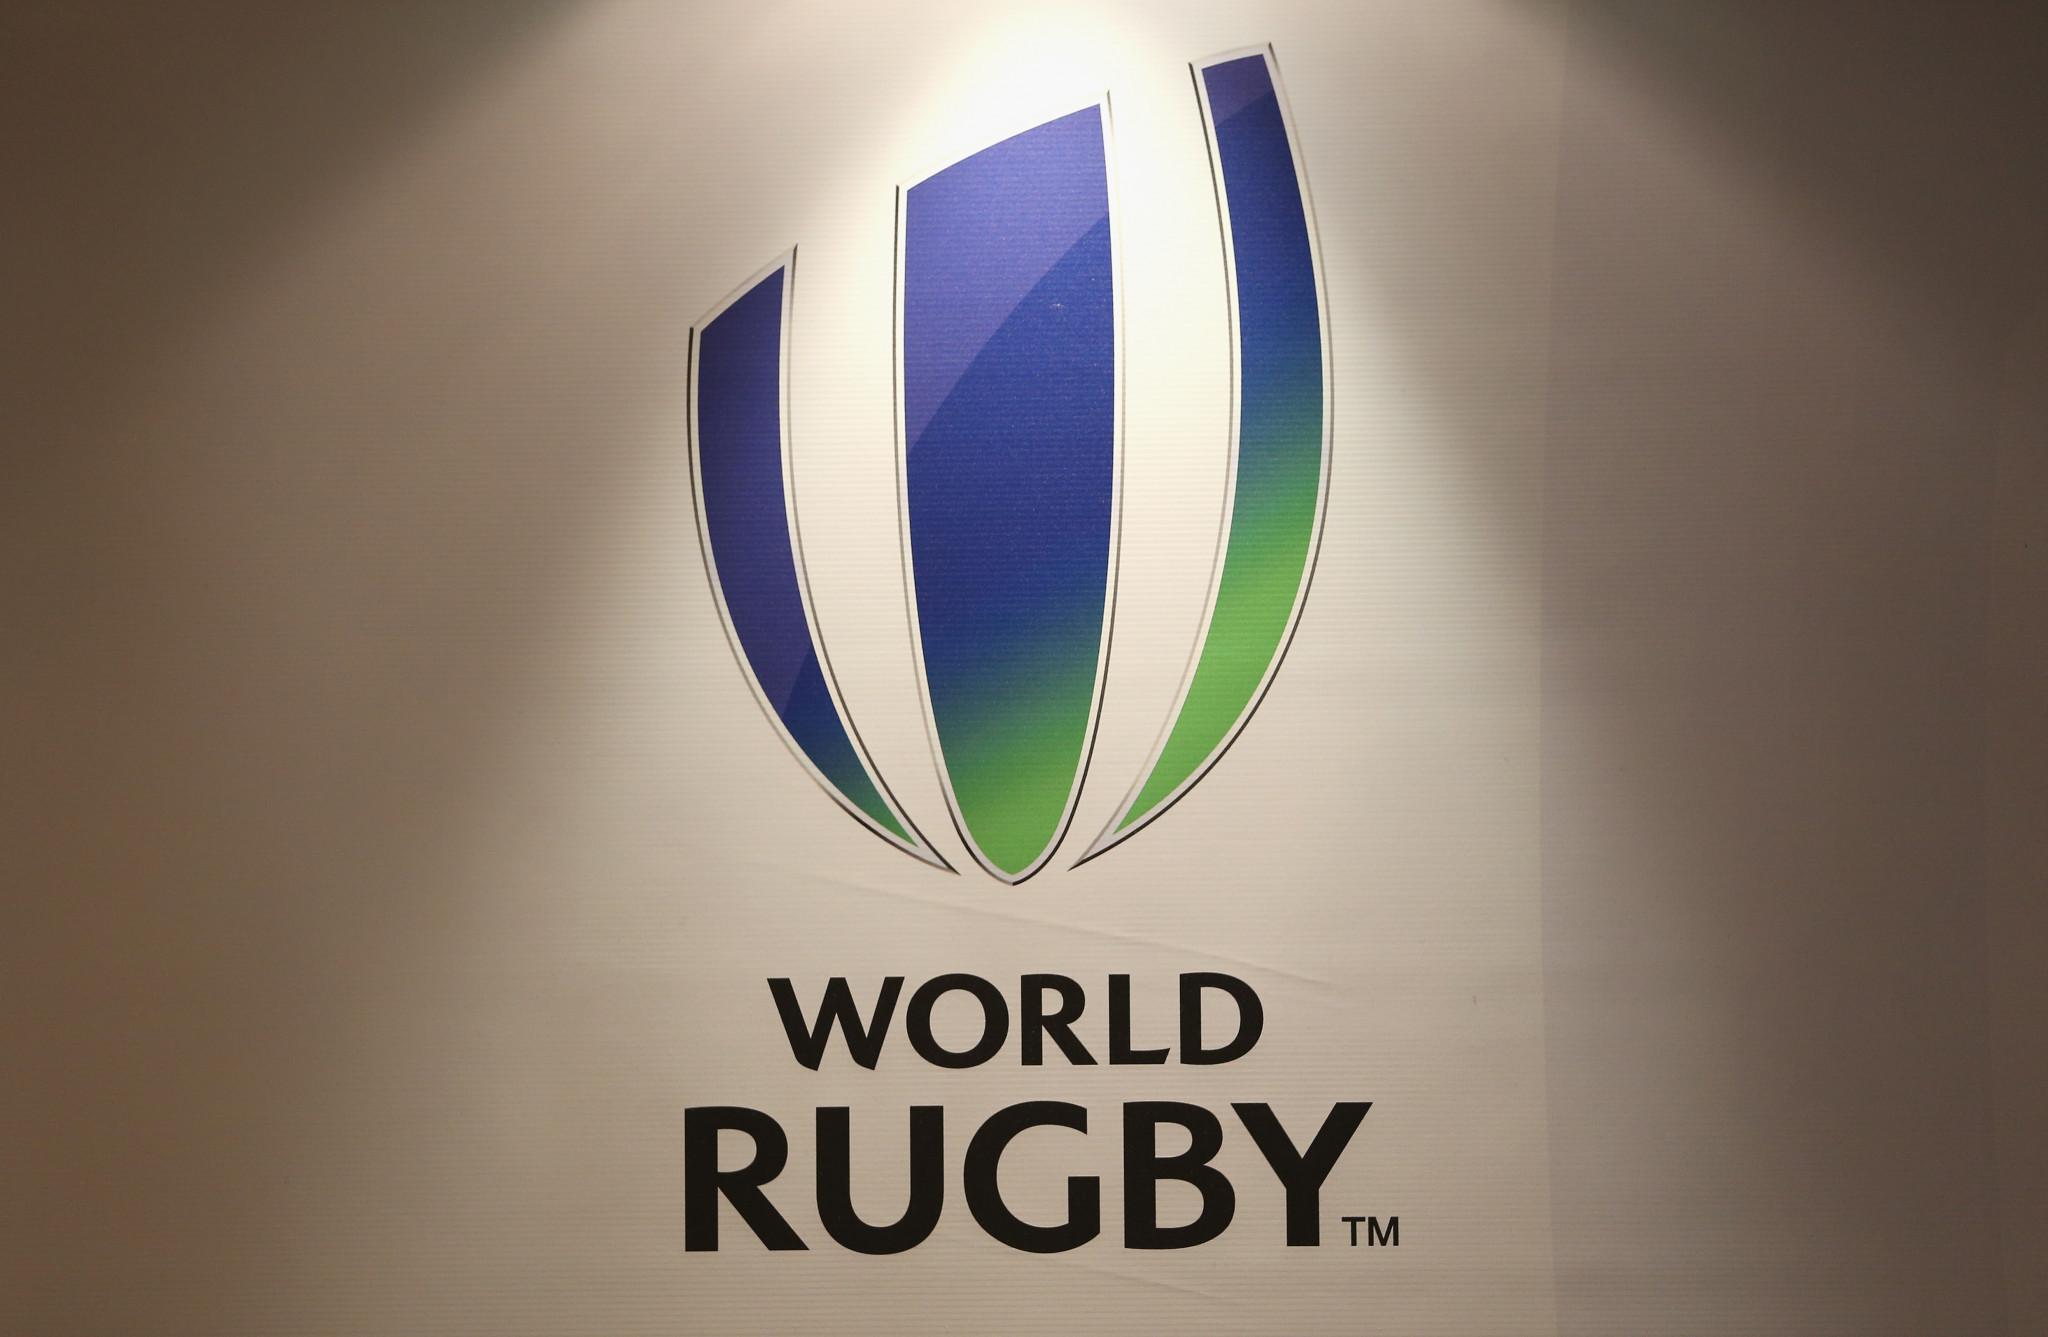 A working group set up to conduct a governance review of World Rugby has released its findings ©Getty Images